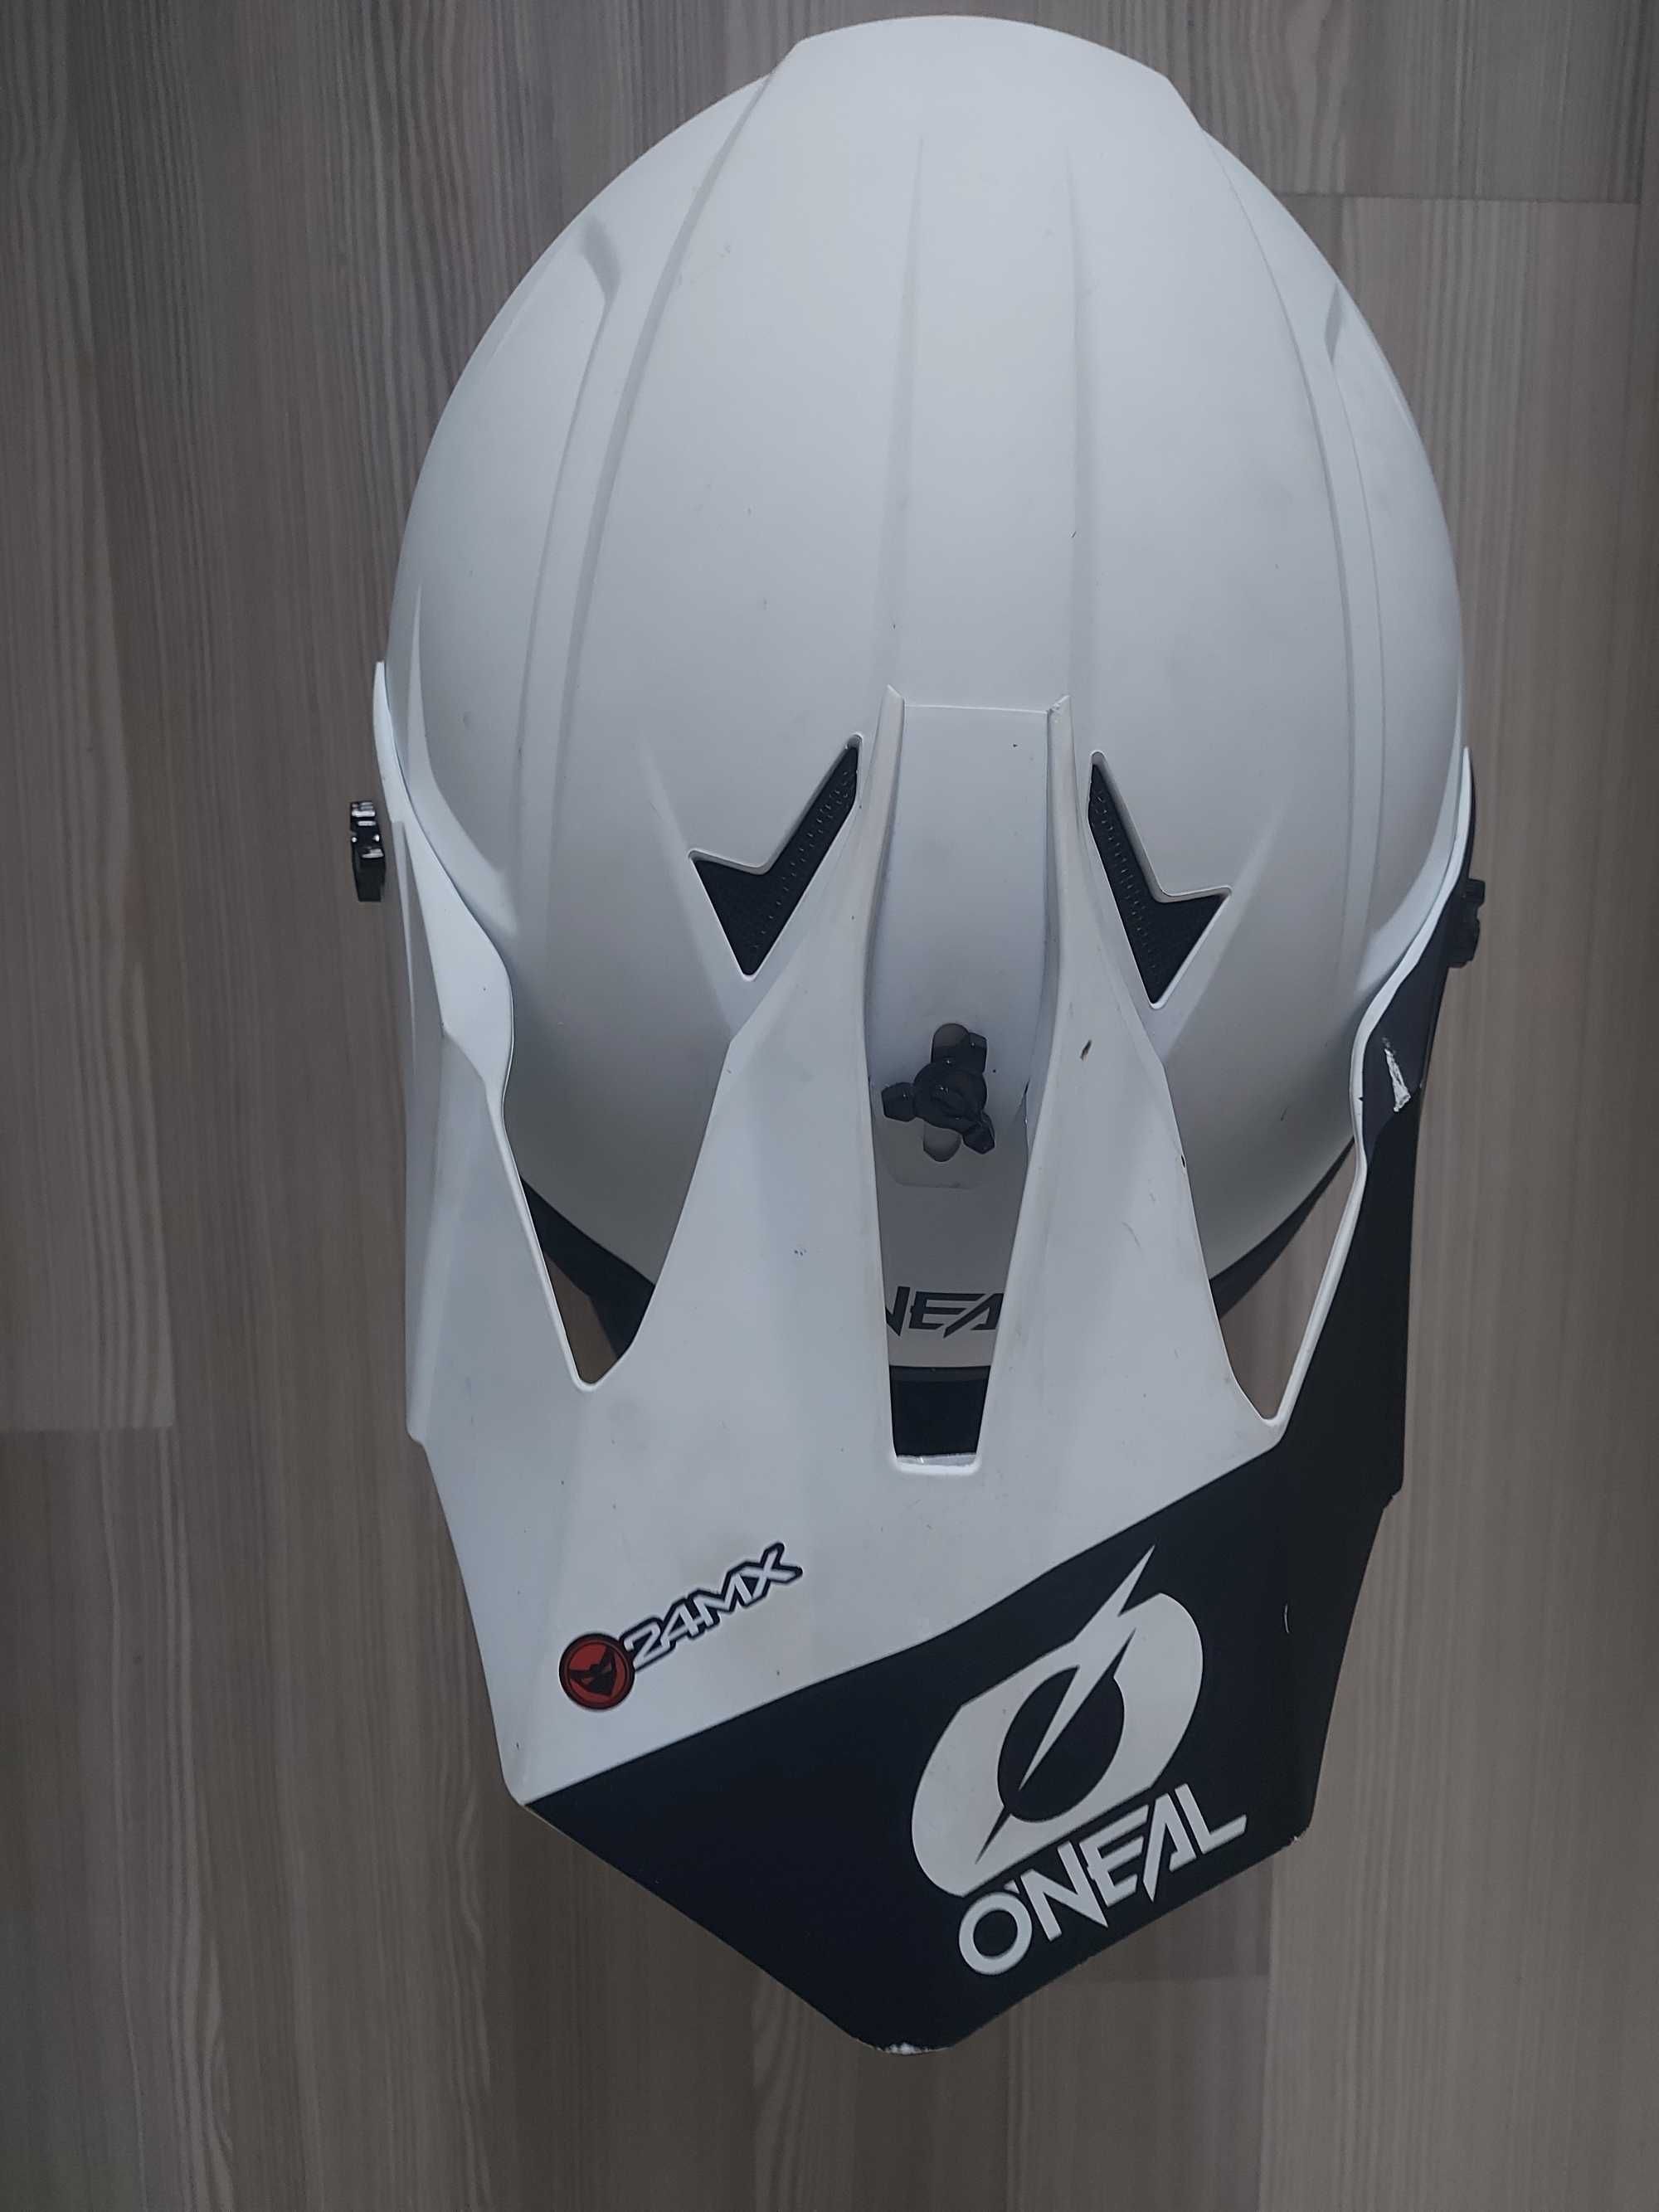 Kask o'neal r.xl